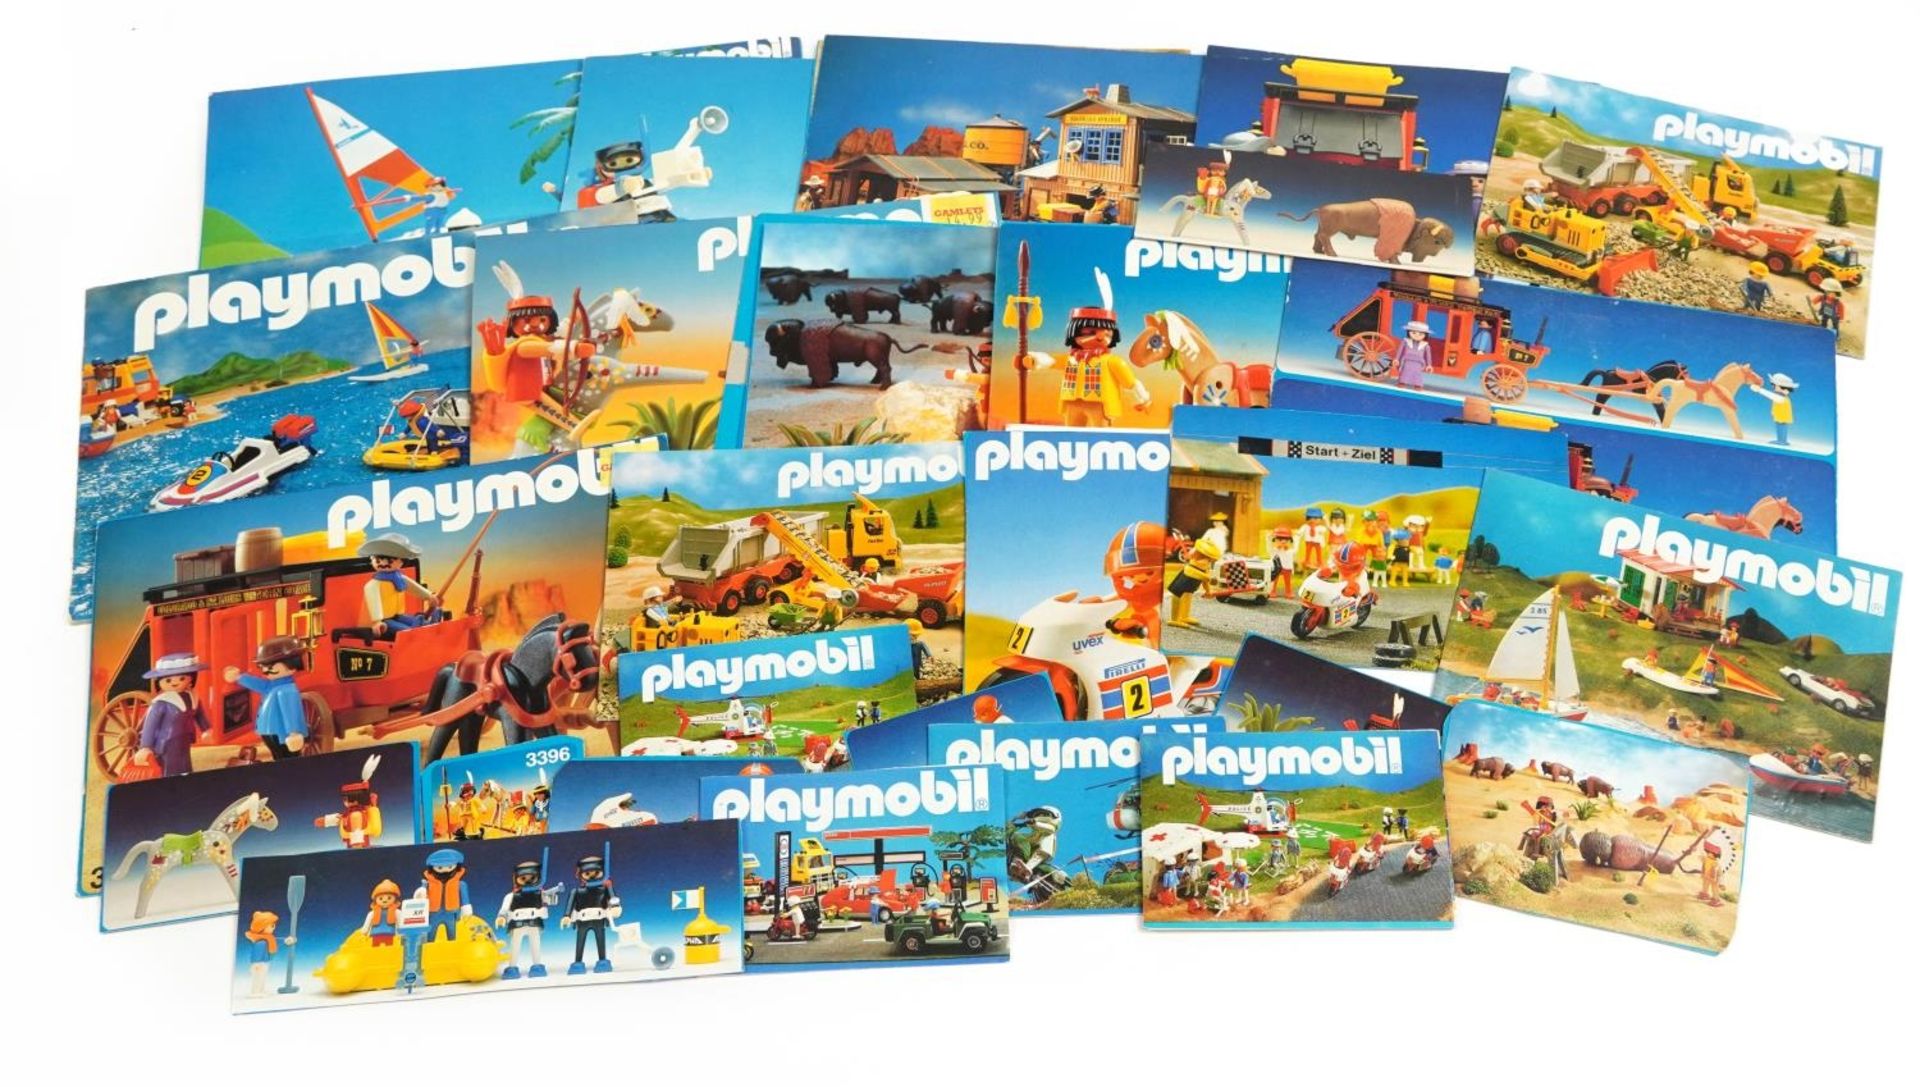 Collection of vintage Playmobil System figures, vehicles, instructions and accessories - Image 6 of 6